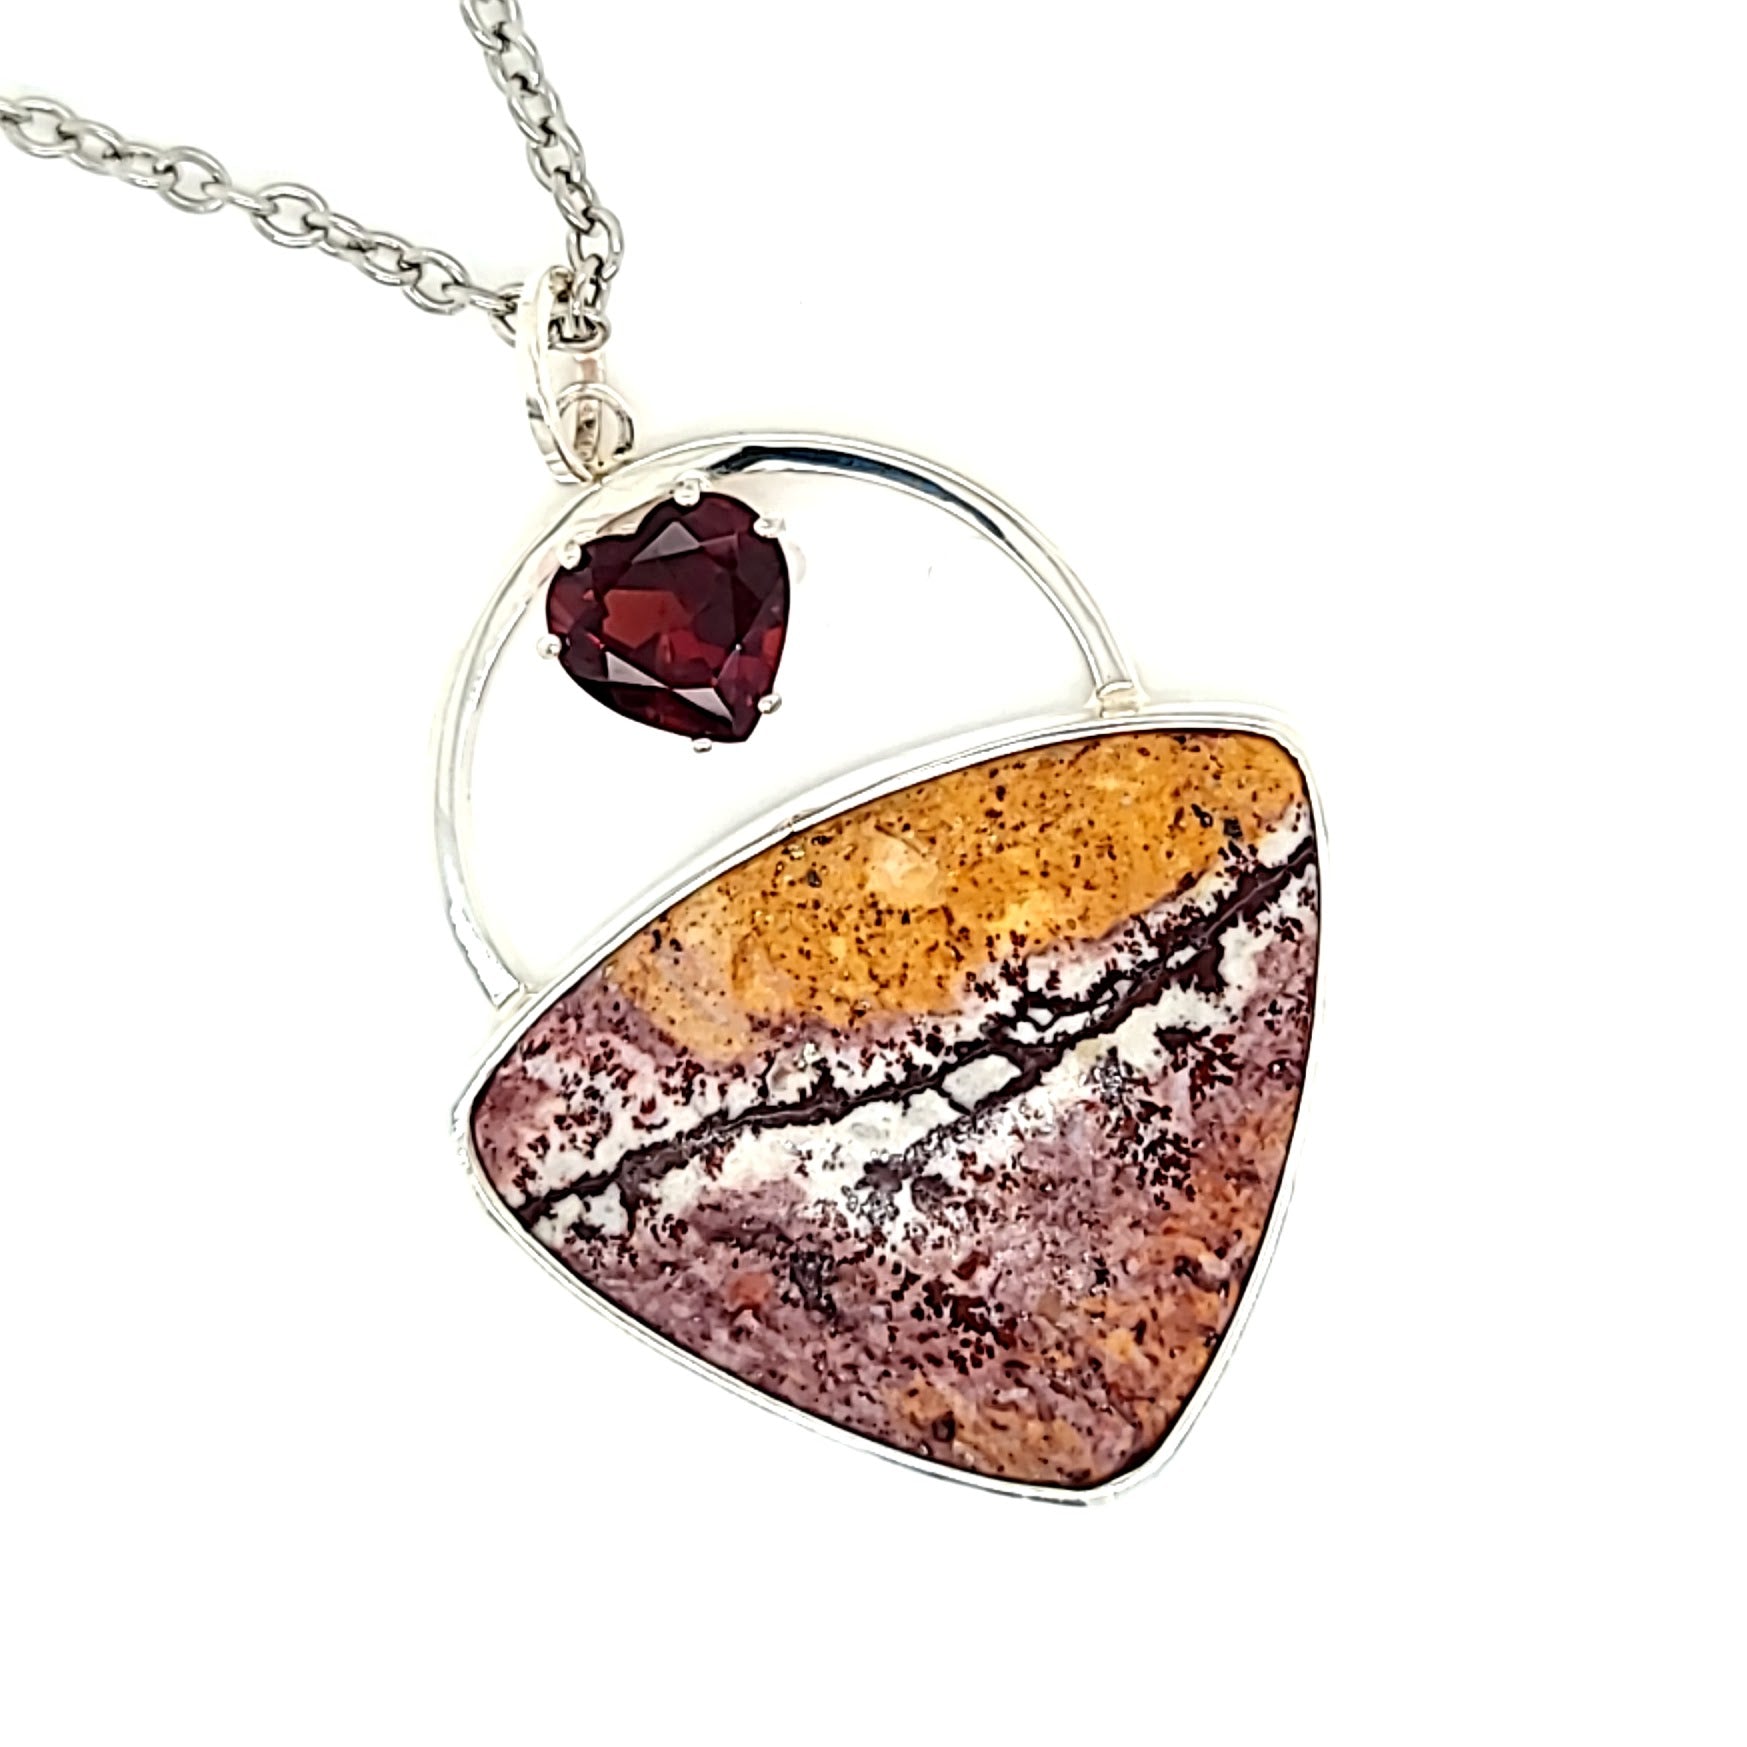 Sterling Silver Sonora Dendritic Rhyolite Pendant with Red Heat Garnet with Palladium Plated Chain.